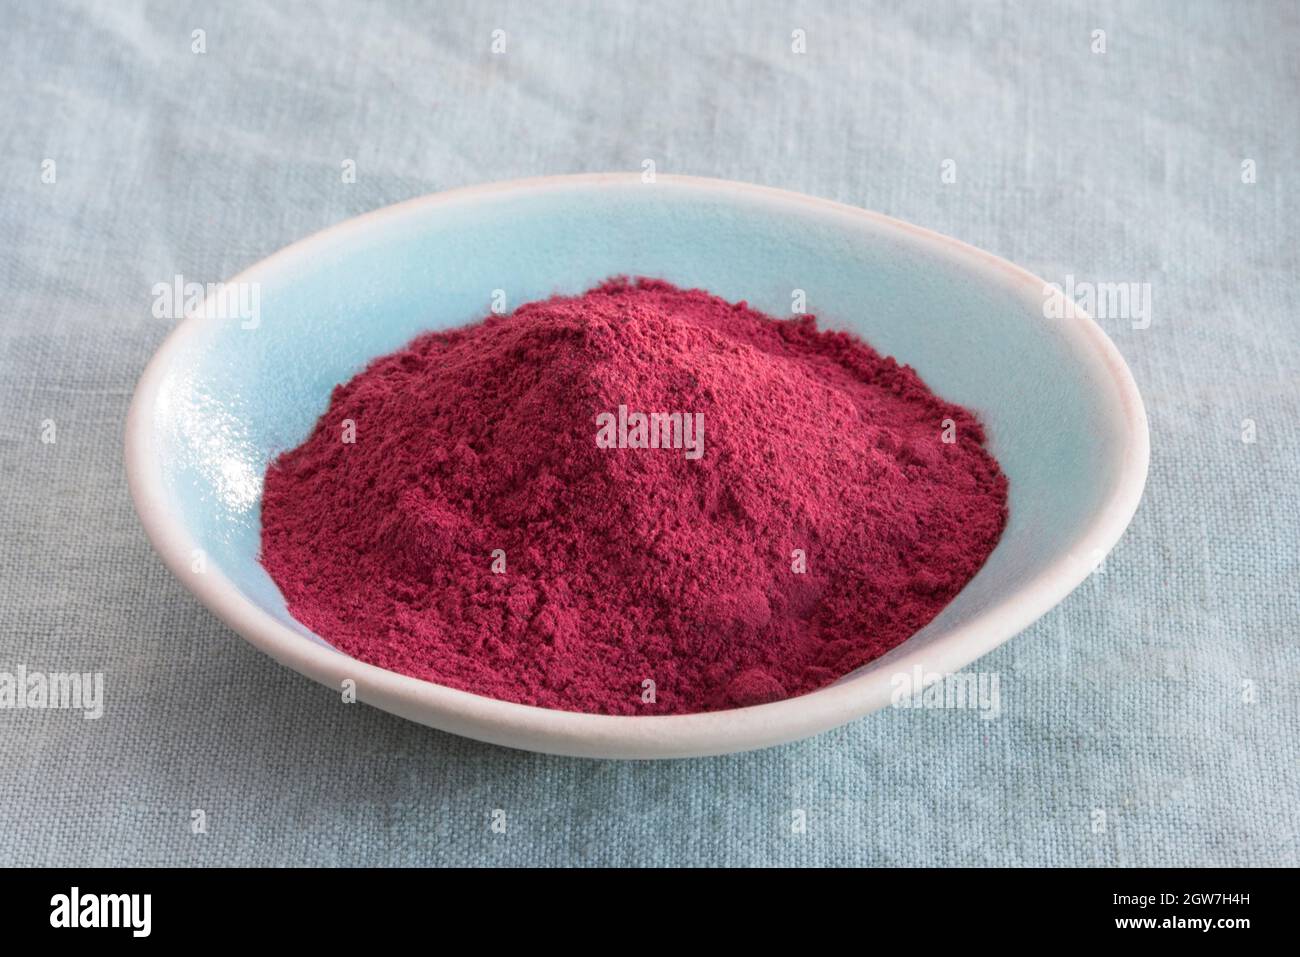 Beet Powder In A Bowl Stock Photo